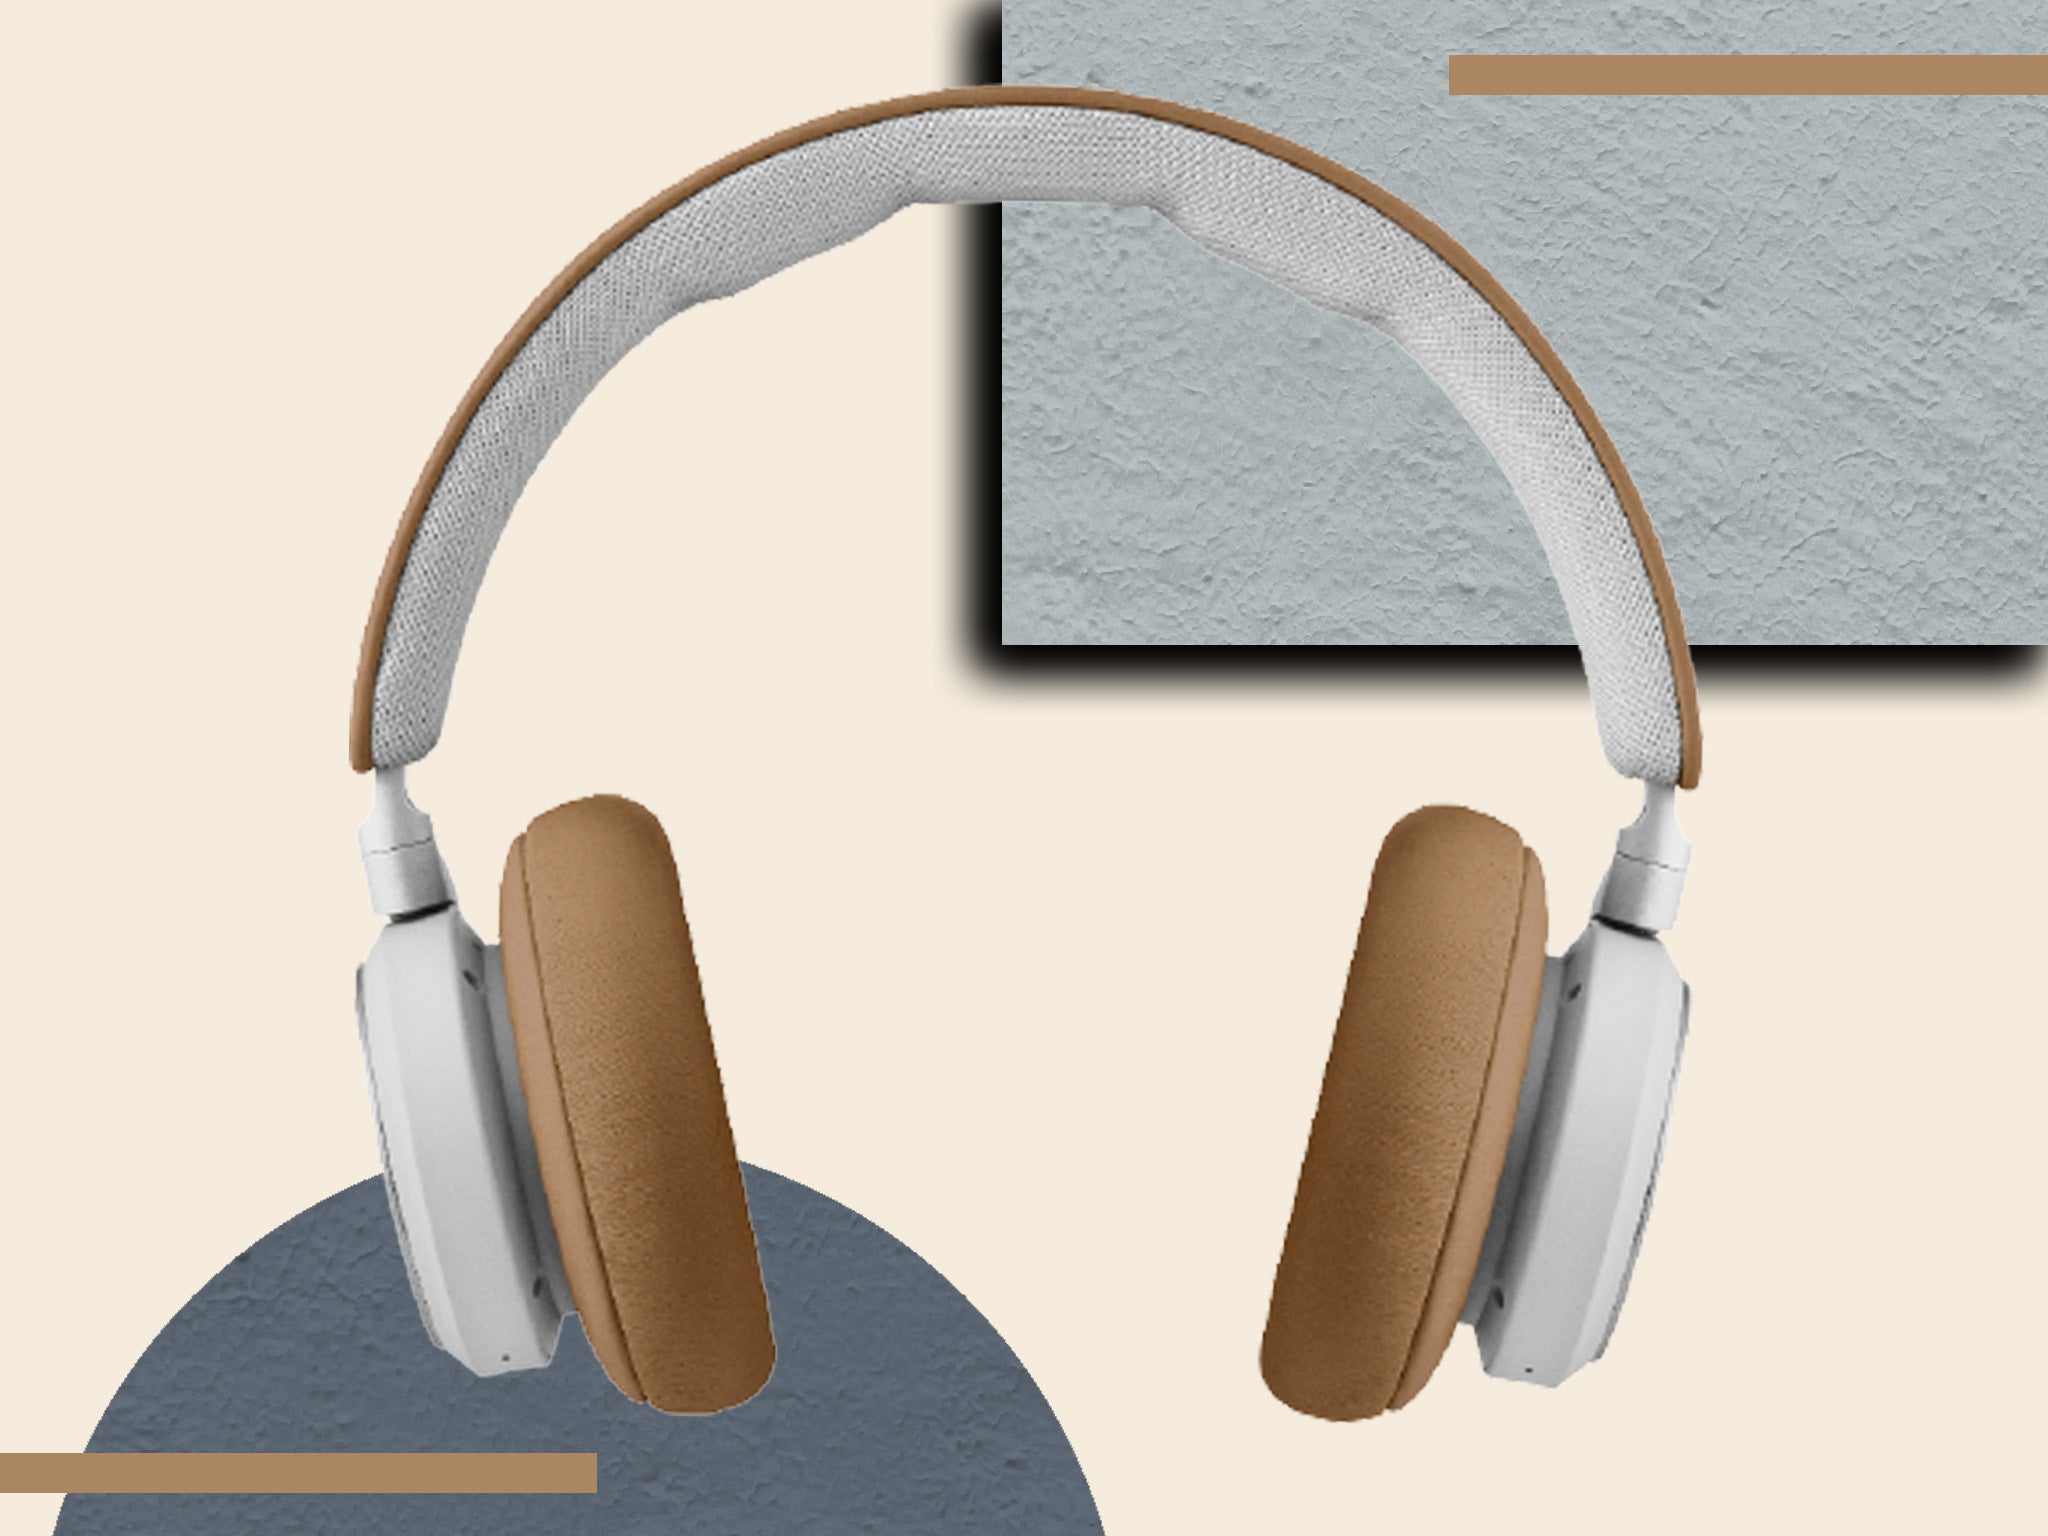 Has B&O successfully managed to balance sound quality with accurate noise-cancellation?